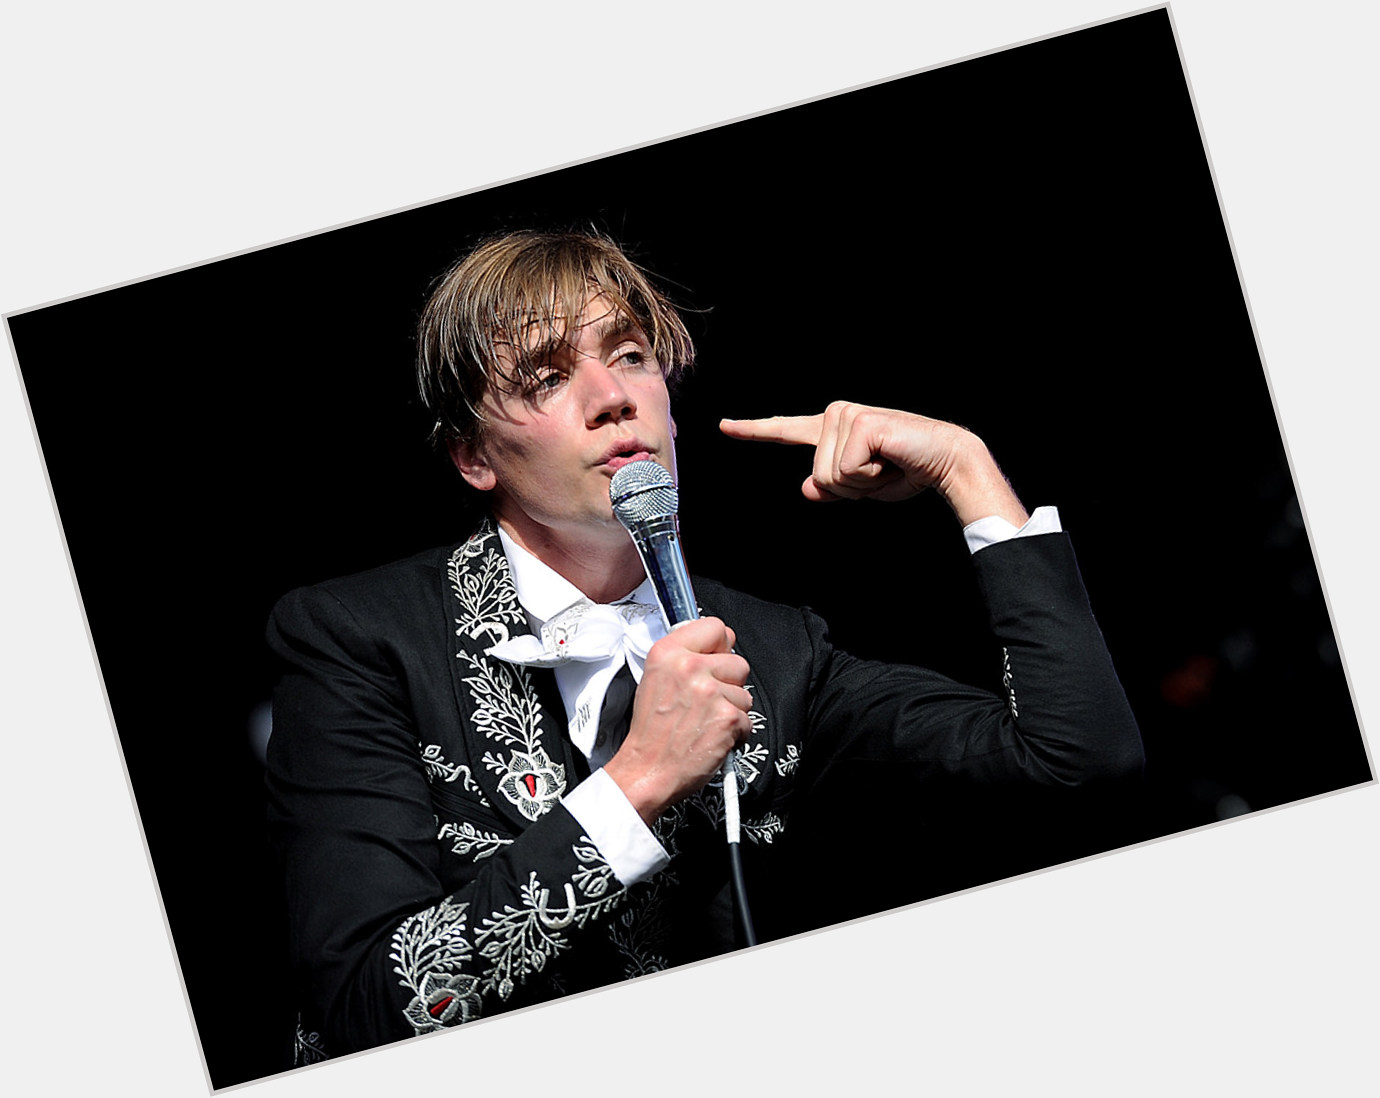 Also want to wish happy birthday to The Hives frontman Per Pelle Almqvist. 